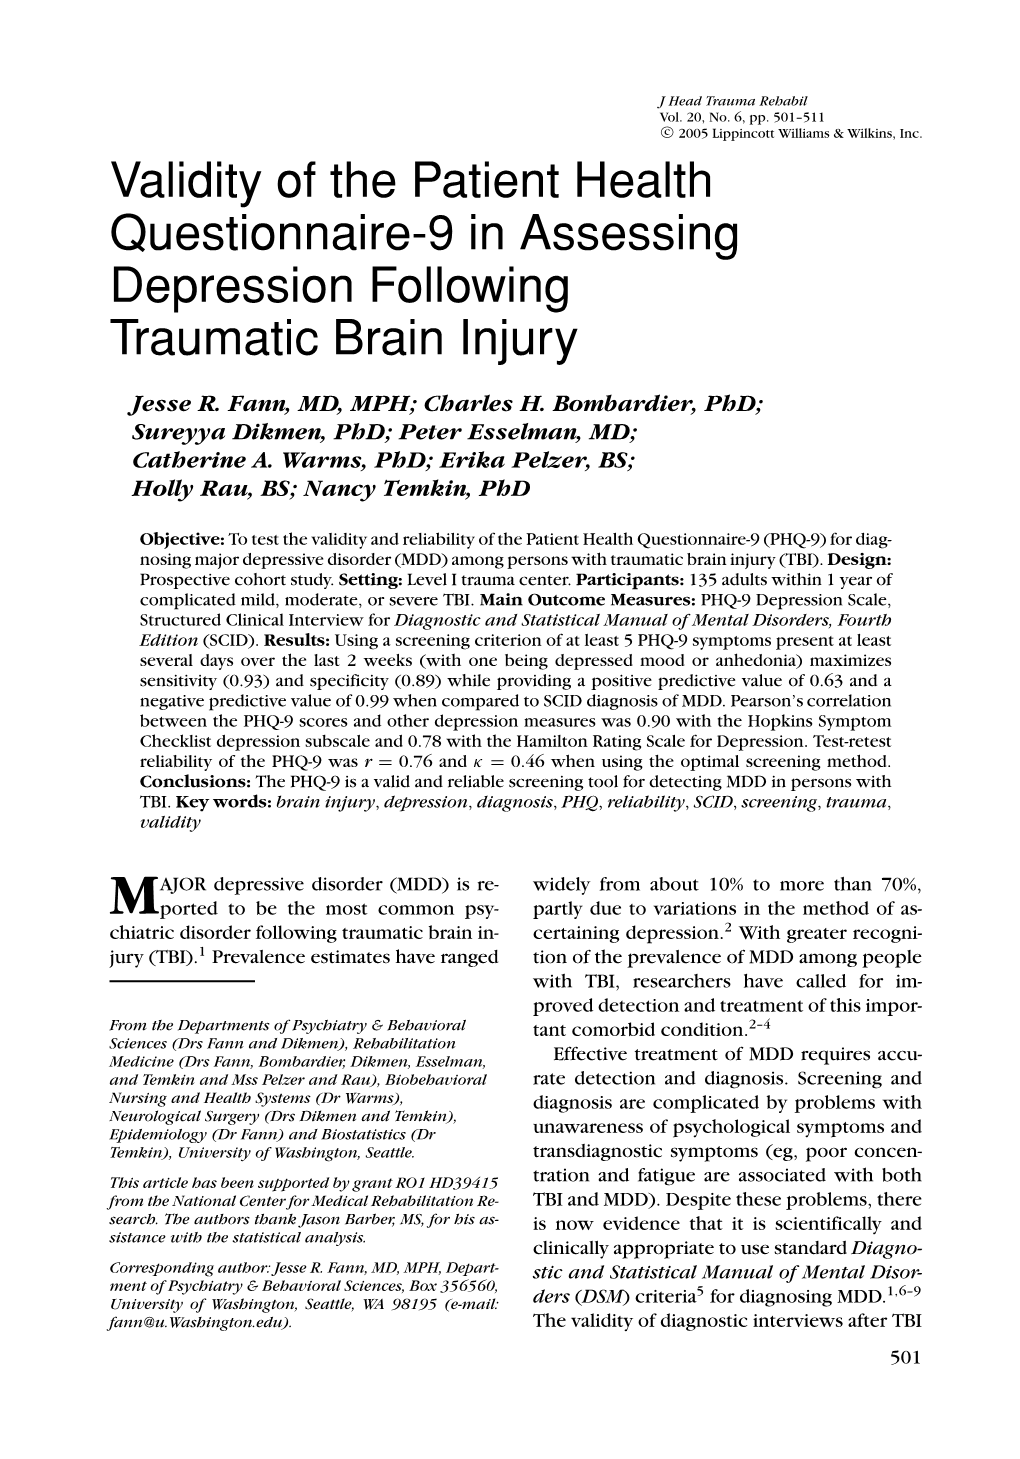 Validity of the Patient Health Questionnaire-9 in Assessing Depression Following Traumatic Brain Injury